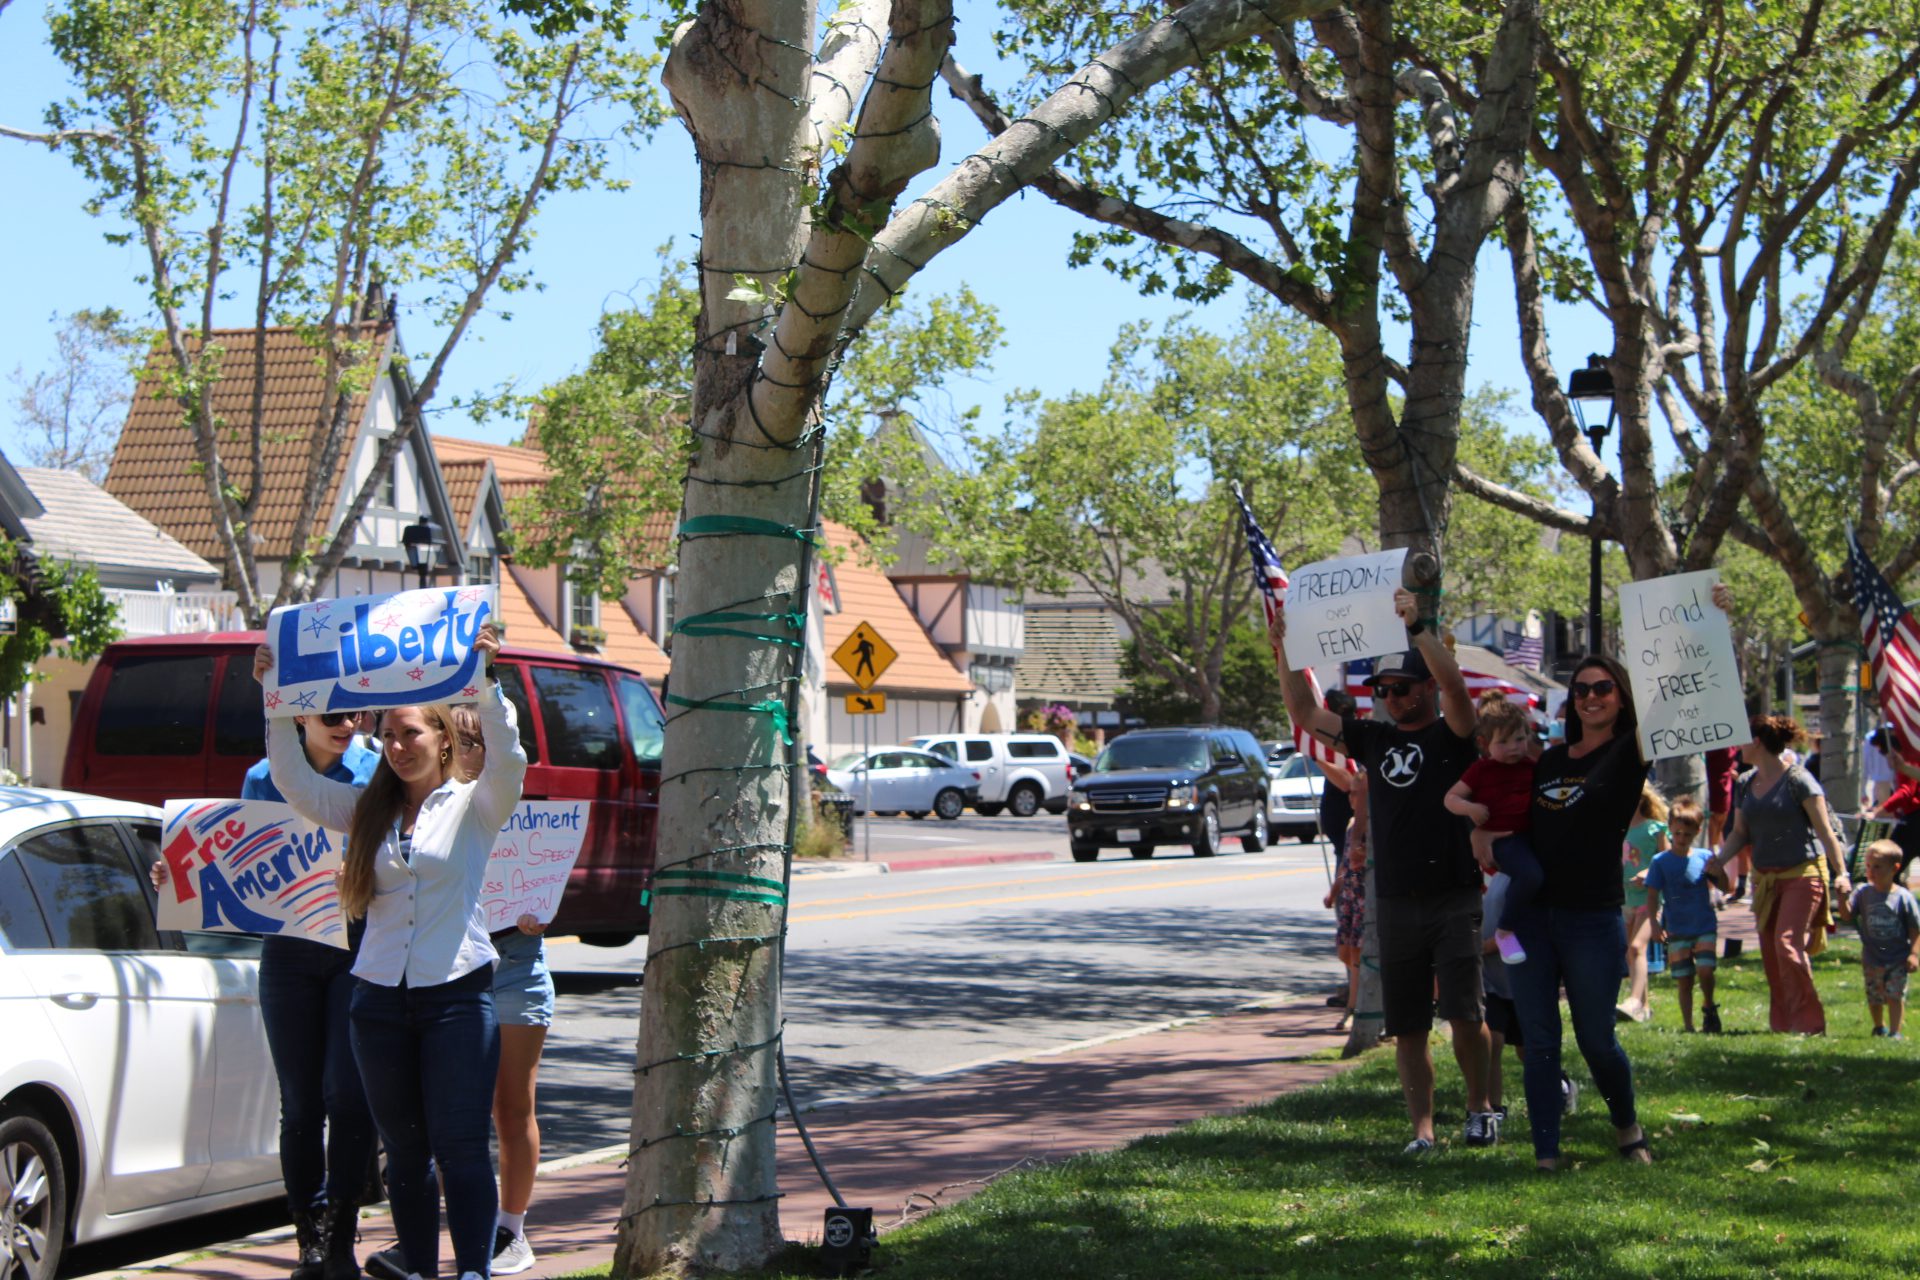 Reopen Santa Ynez Valley rally wants business to reopen safely